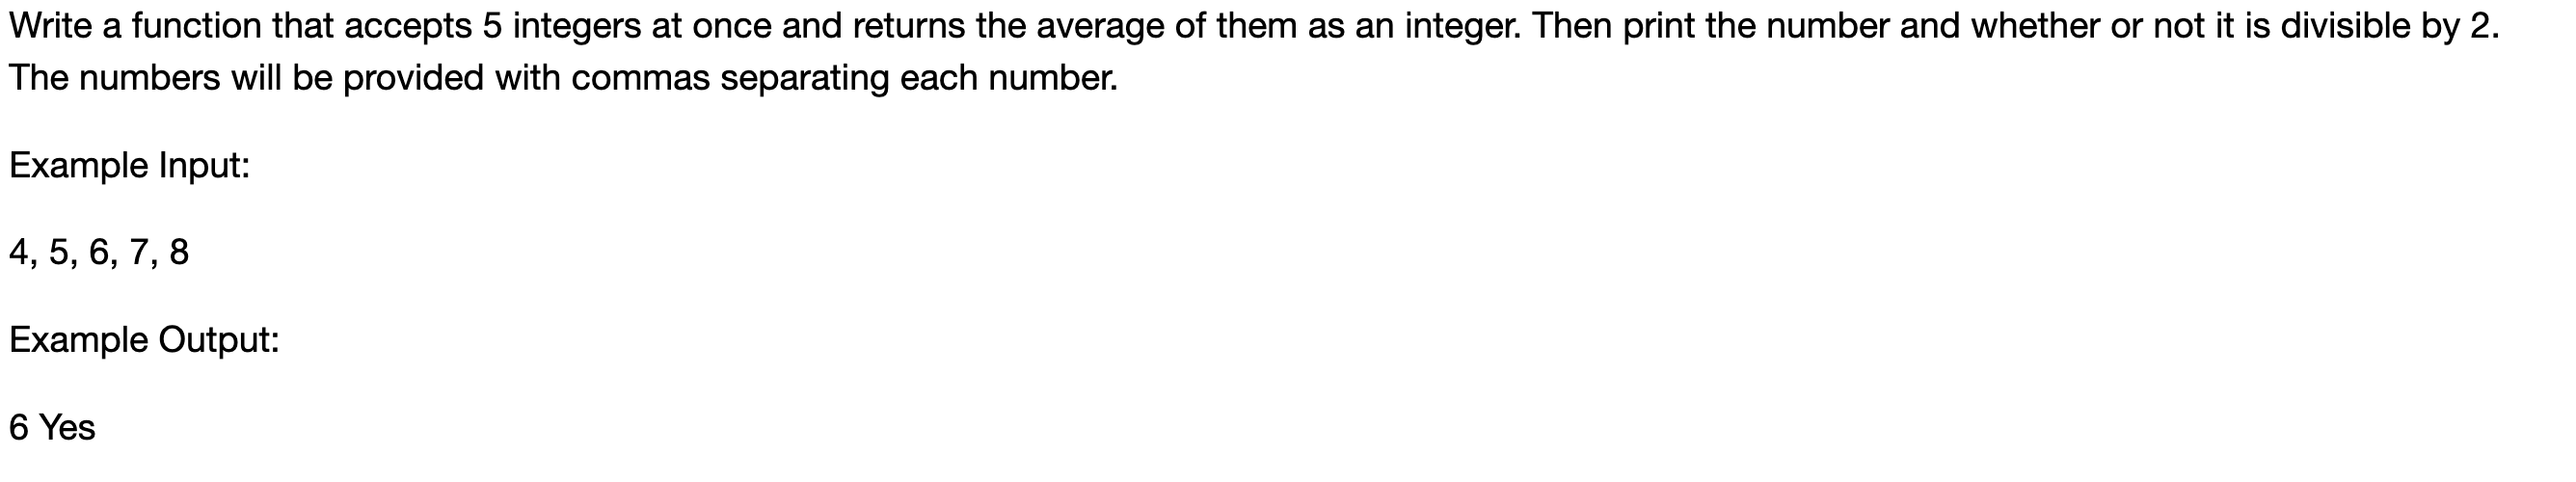 Write a function that accepts 5 integers at once and returns the average of them as an integer. Then print